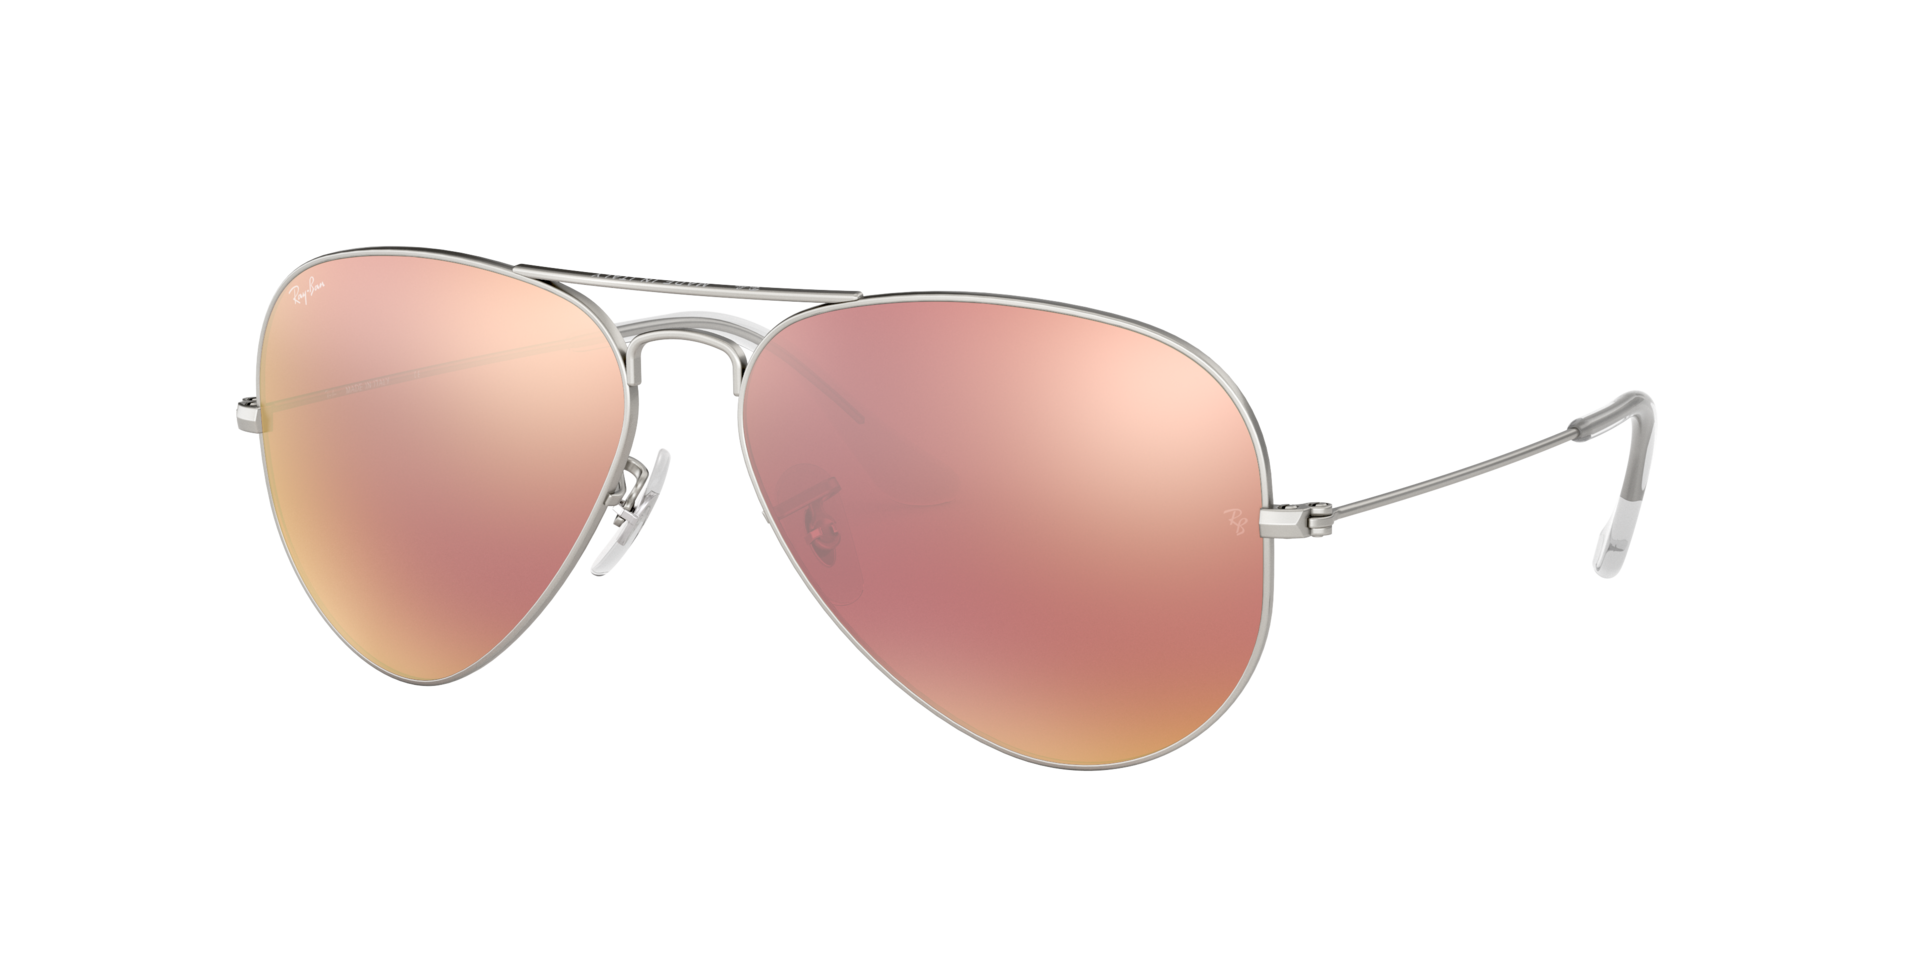 Ray-Ban Aviator Large Metal Sonnenbrille RB3025 019/Z2 55